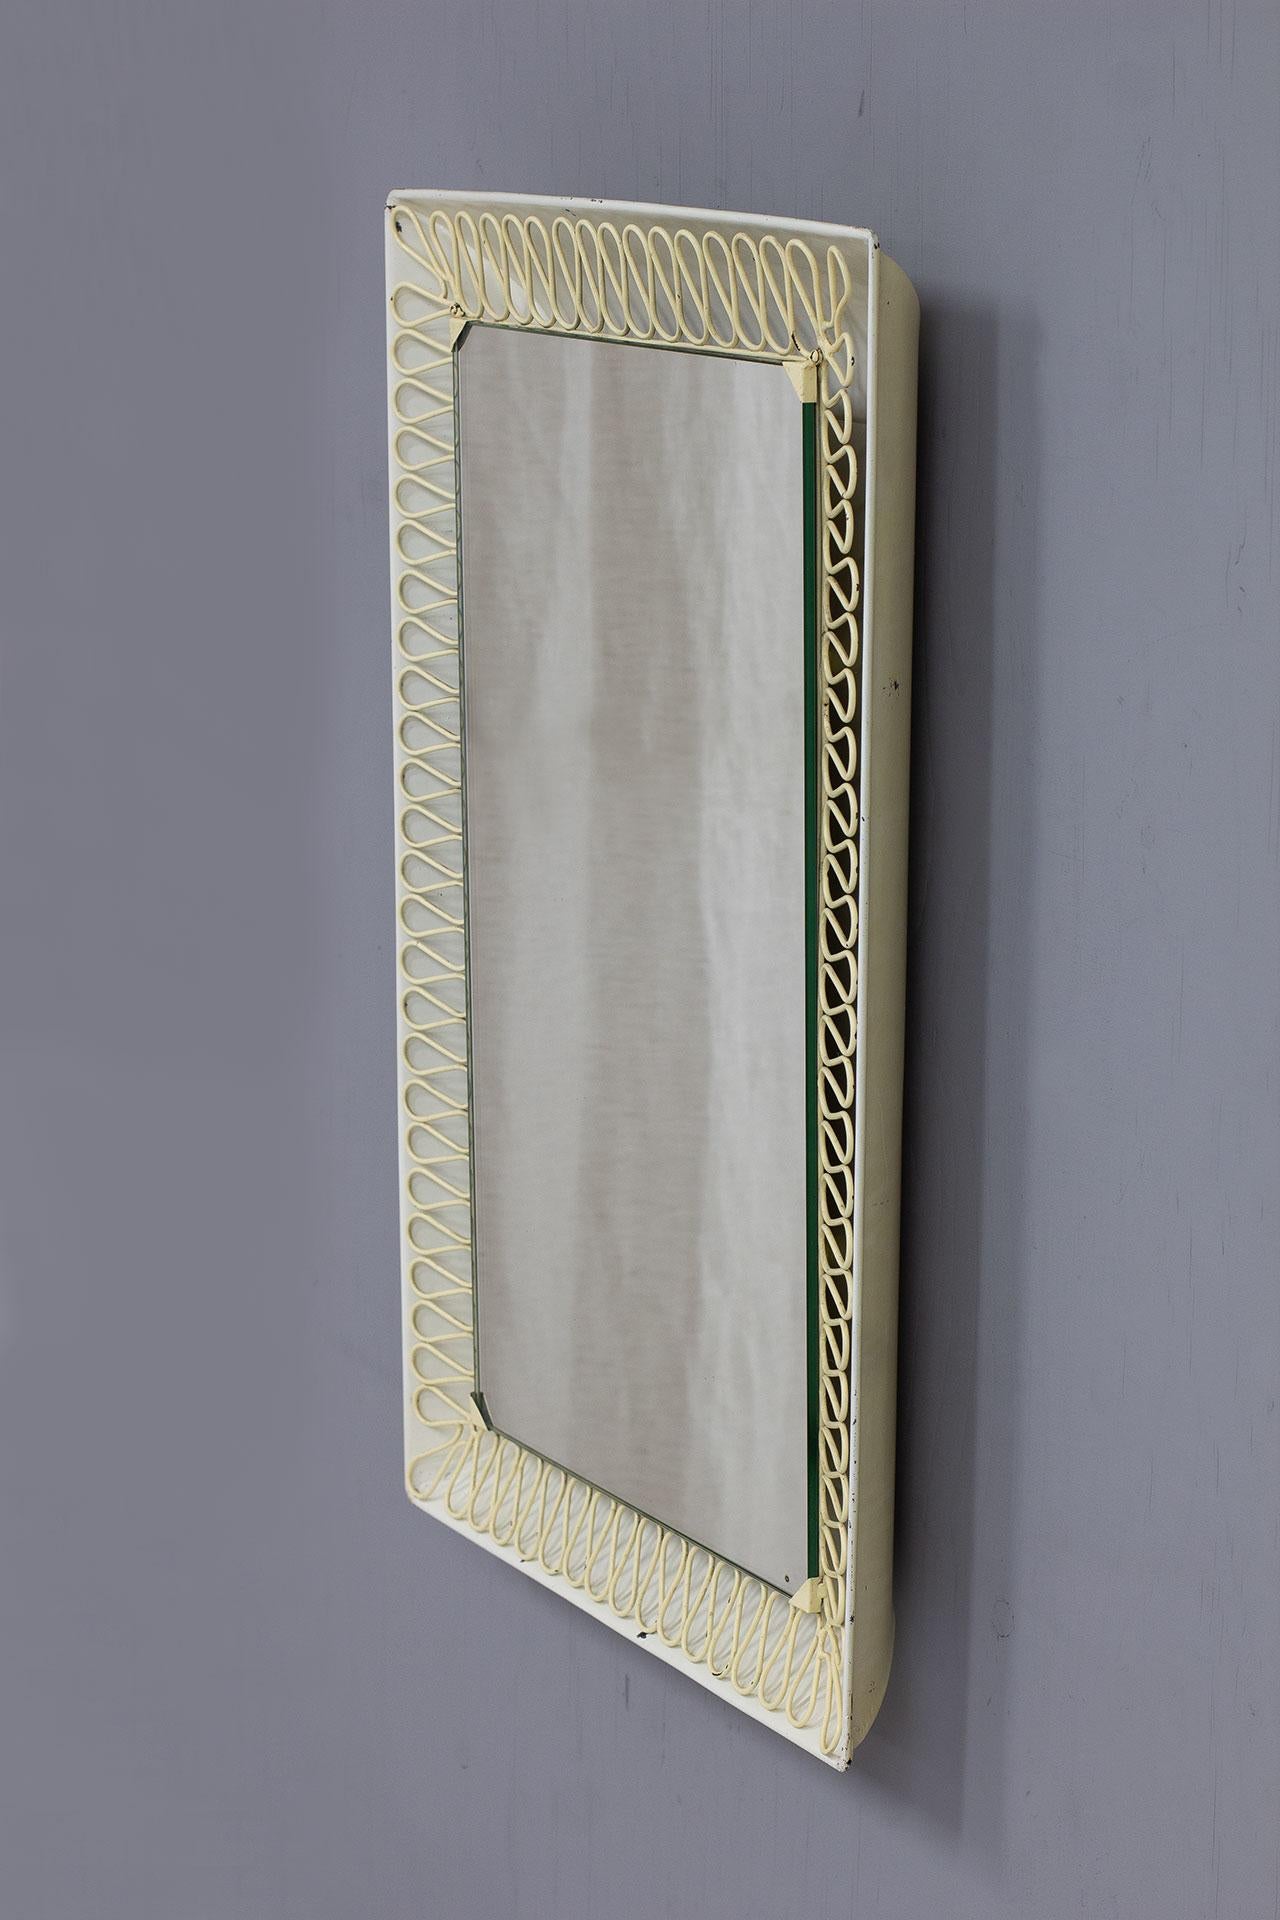 Swedish Modern Illuminated Mirror, 1940s In Good Condition For Sale In Stockholm, SE